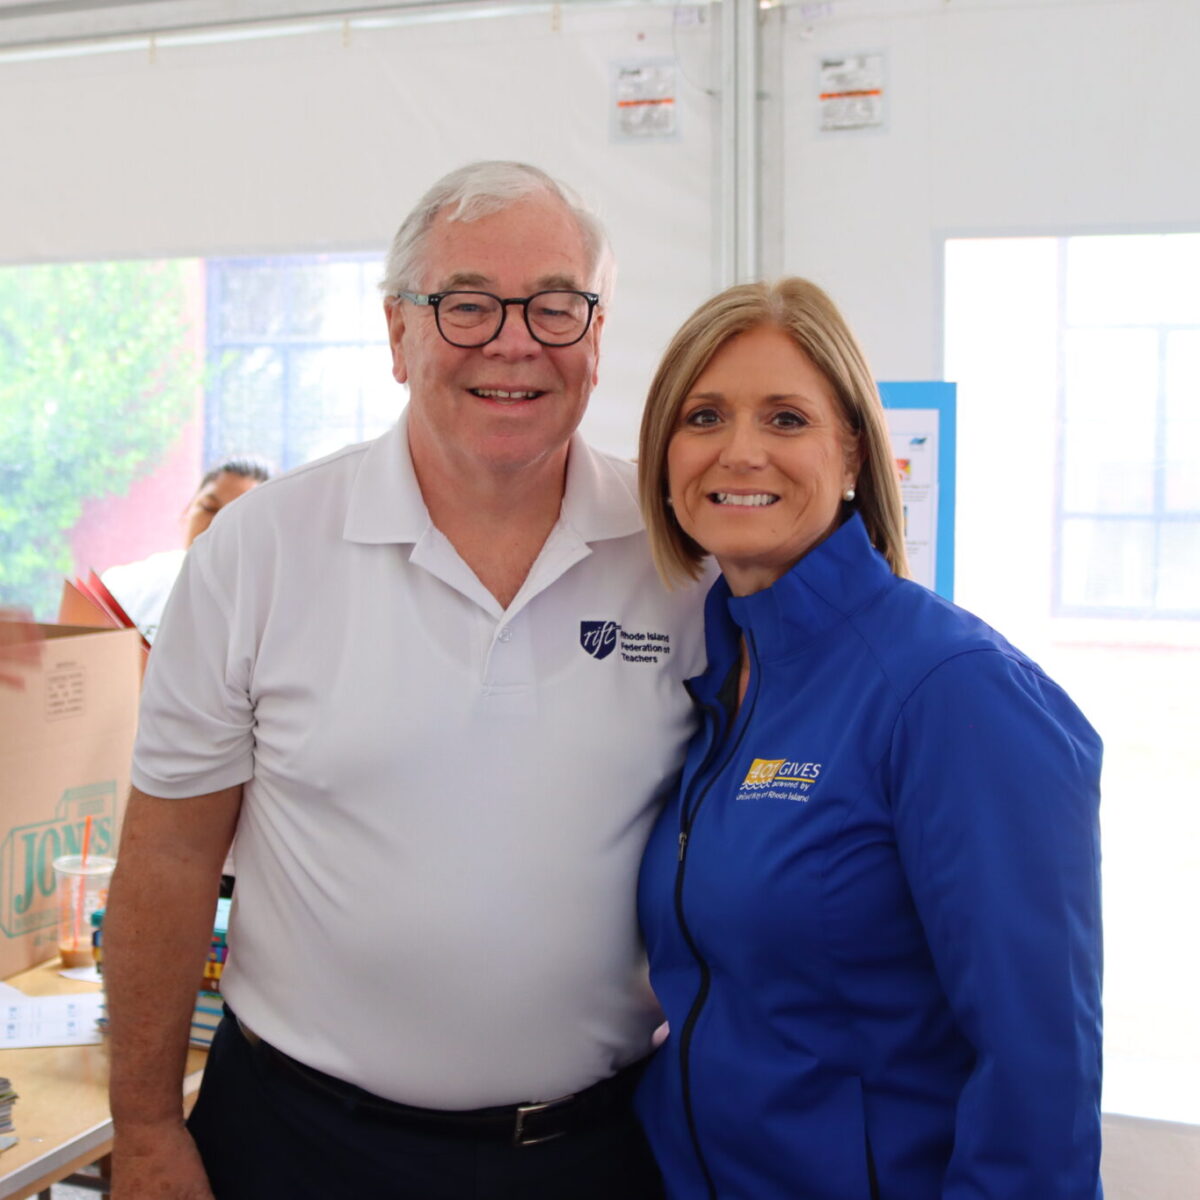 Cortney Nicolato, United Way of Rhode Island's president and CEO, poses with Frank Flynn, AFT VP.